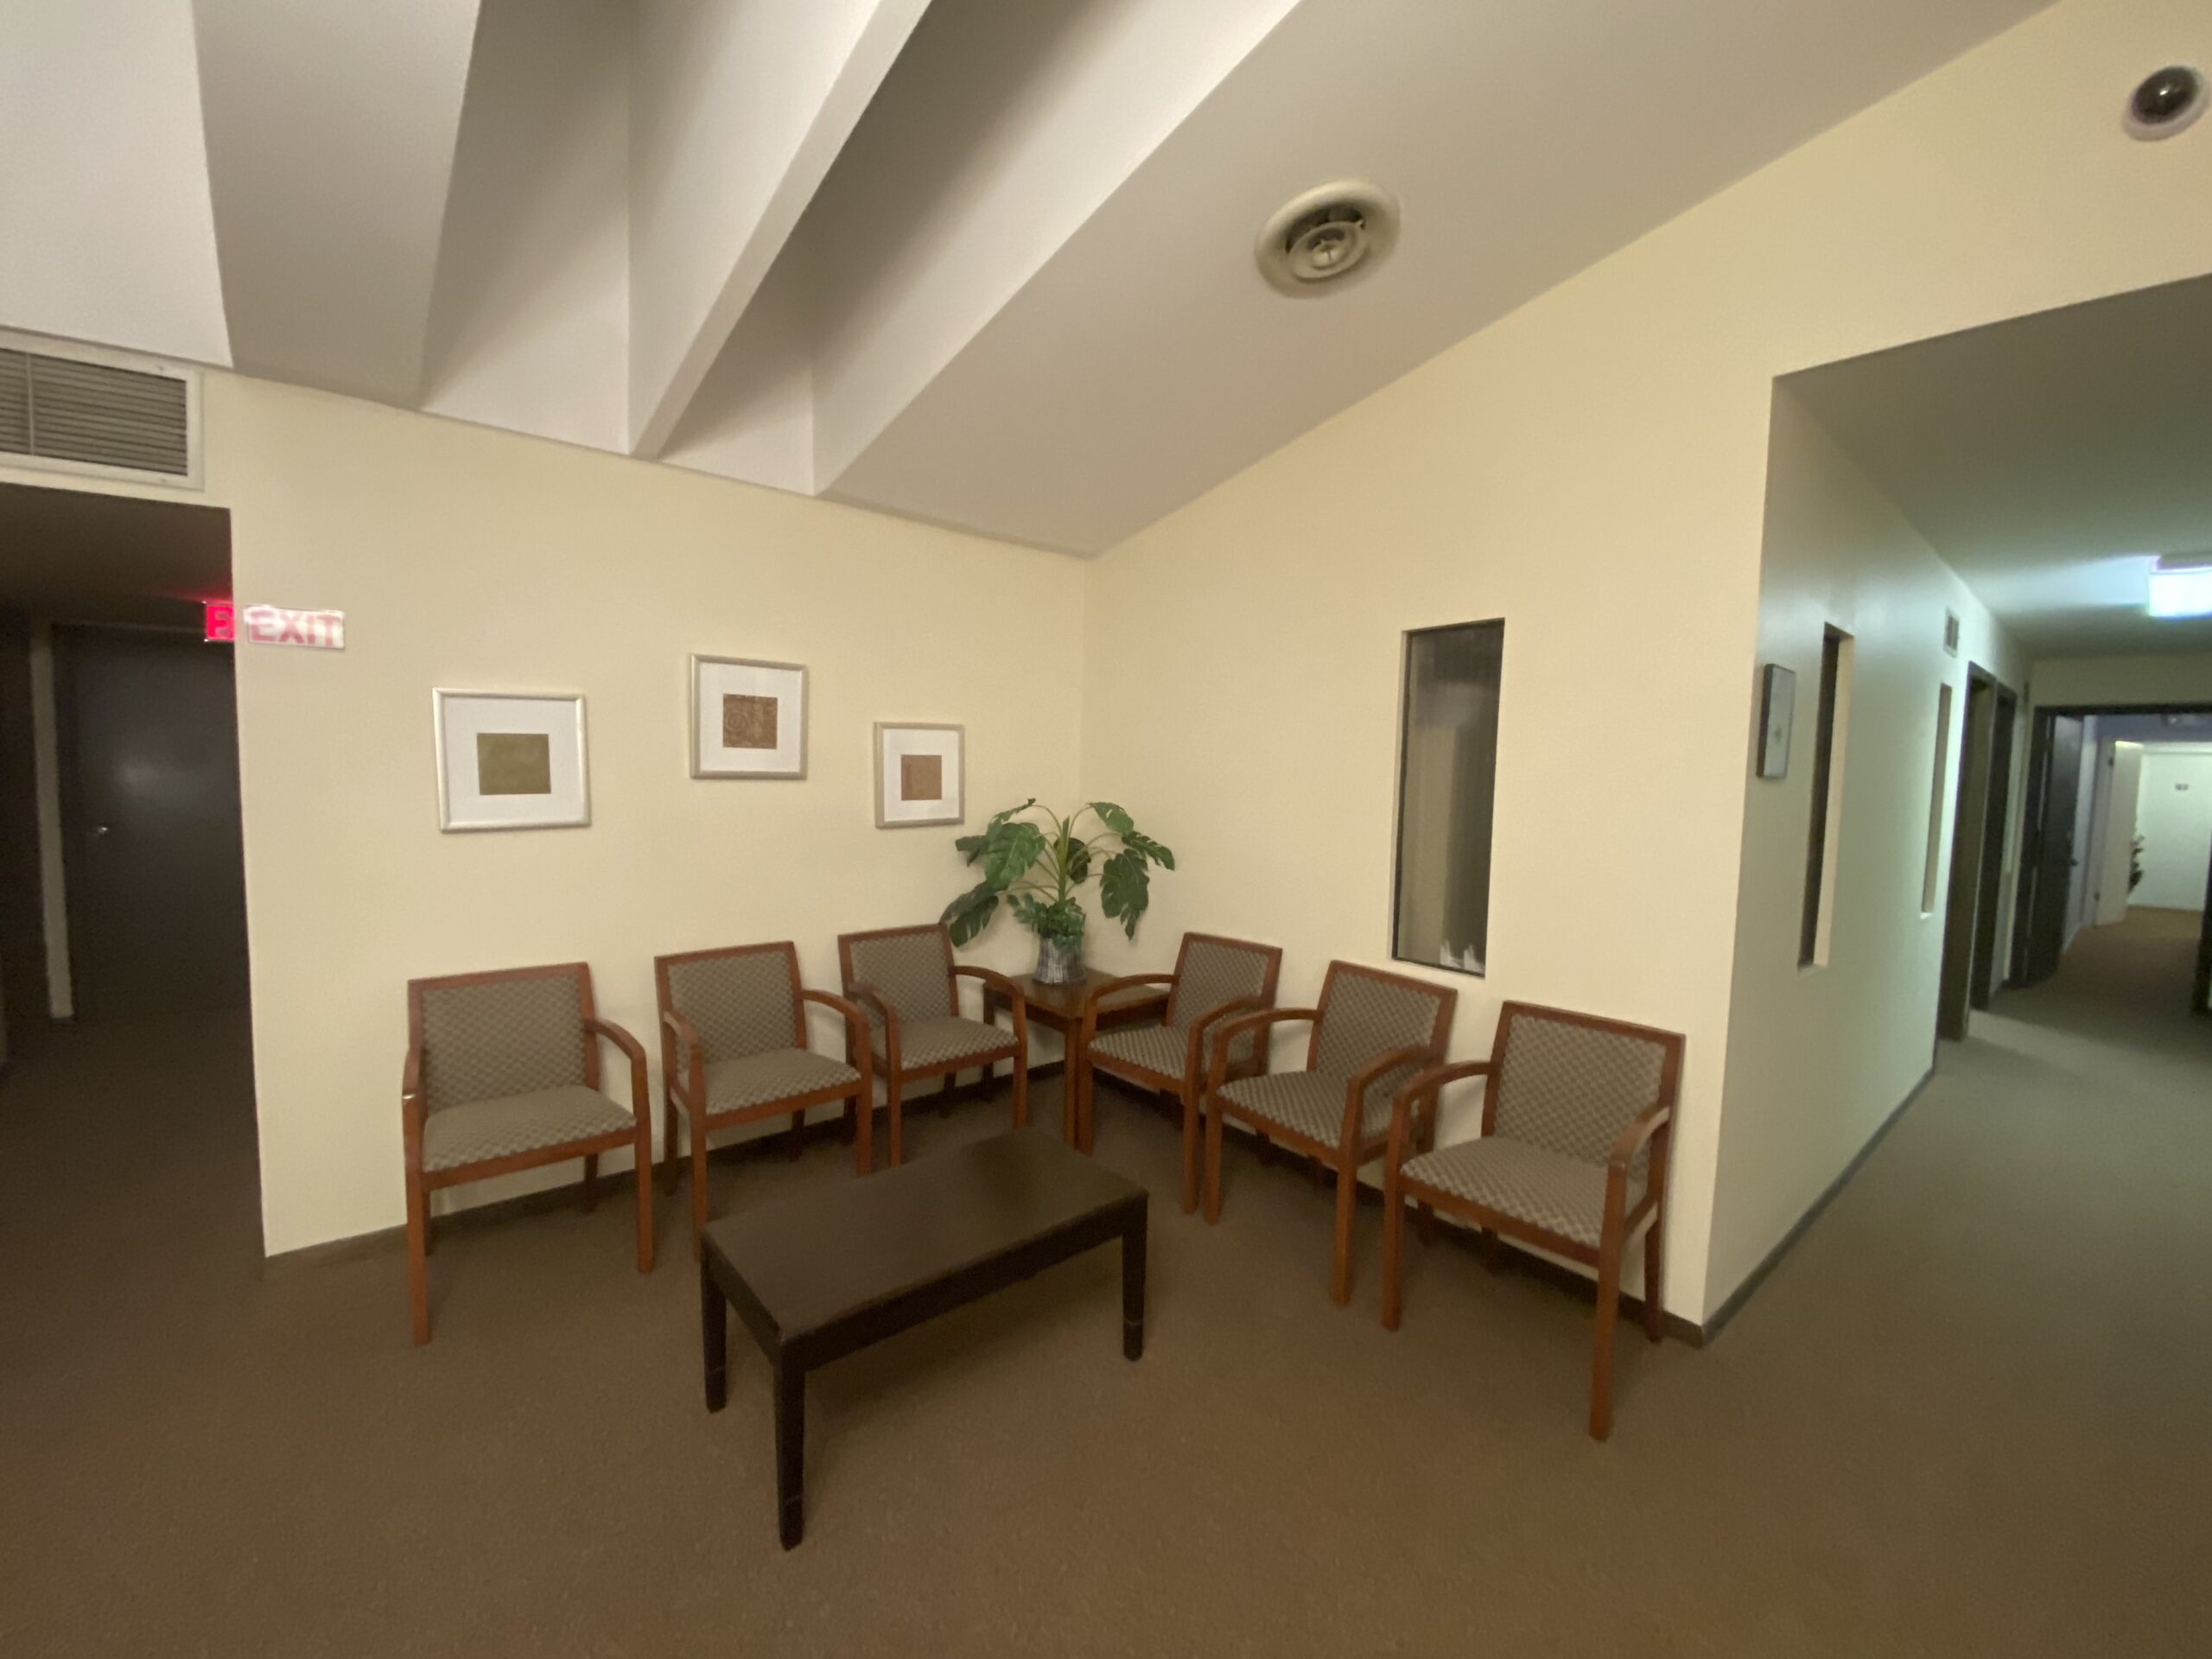 Beyond Healing Counseling Room